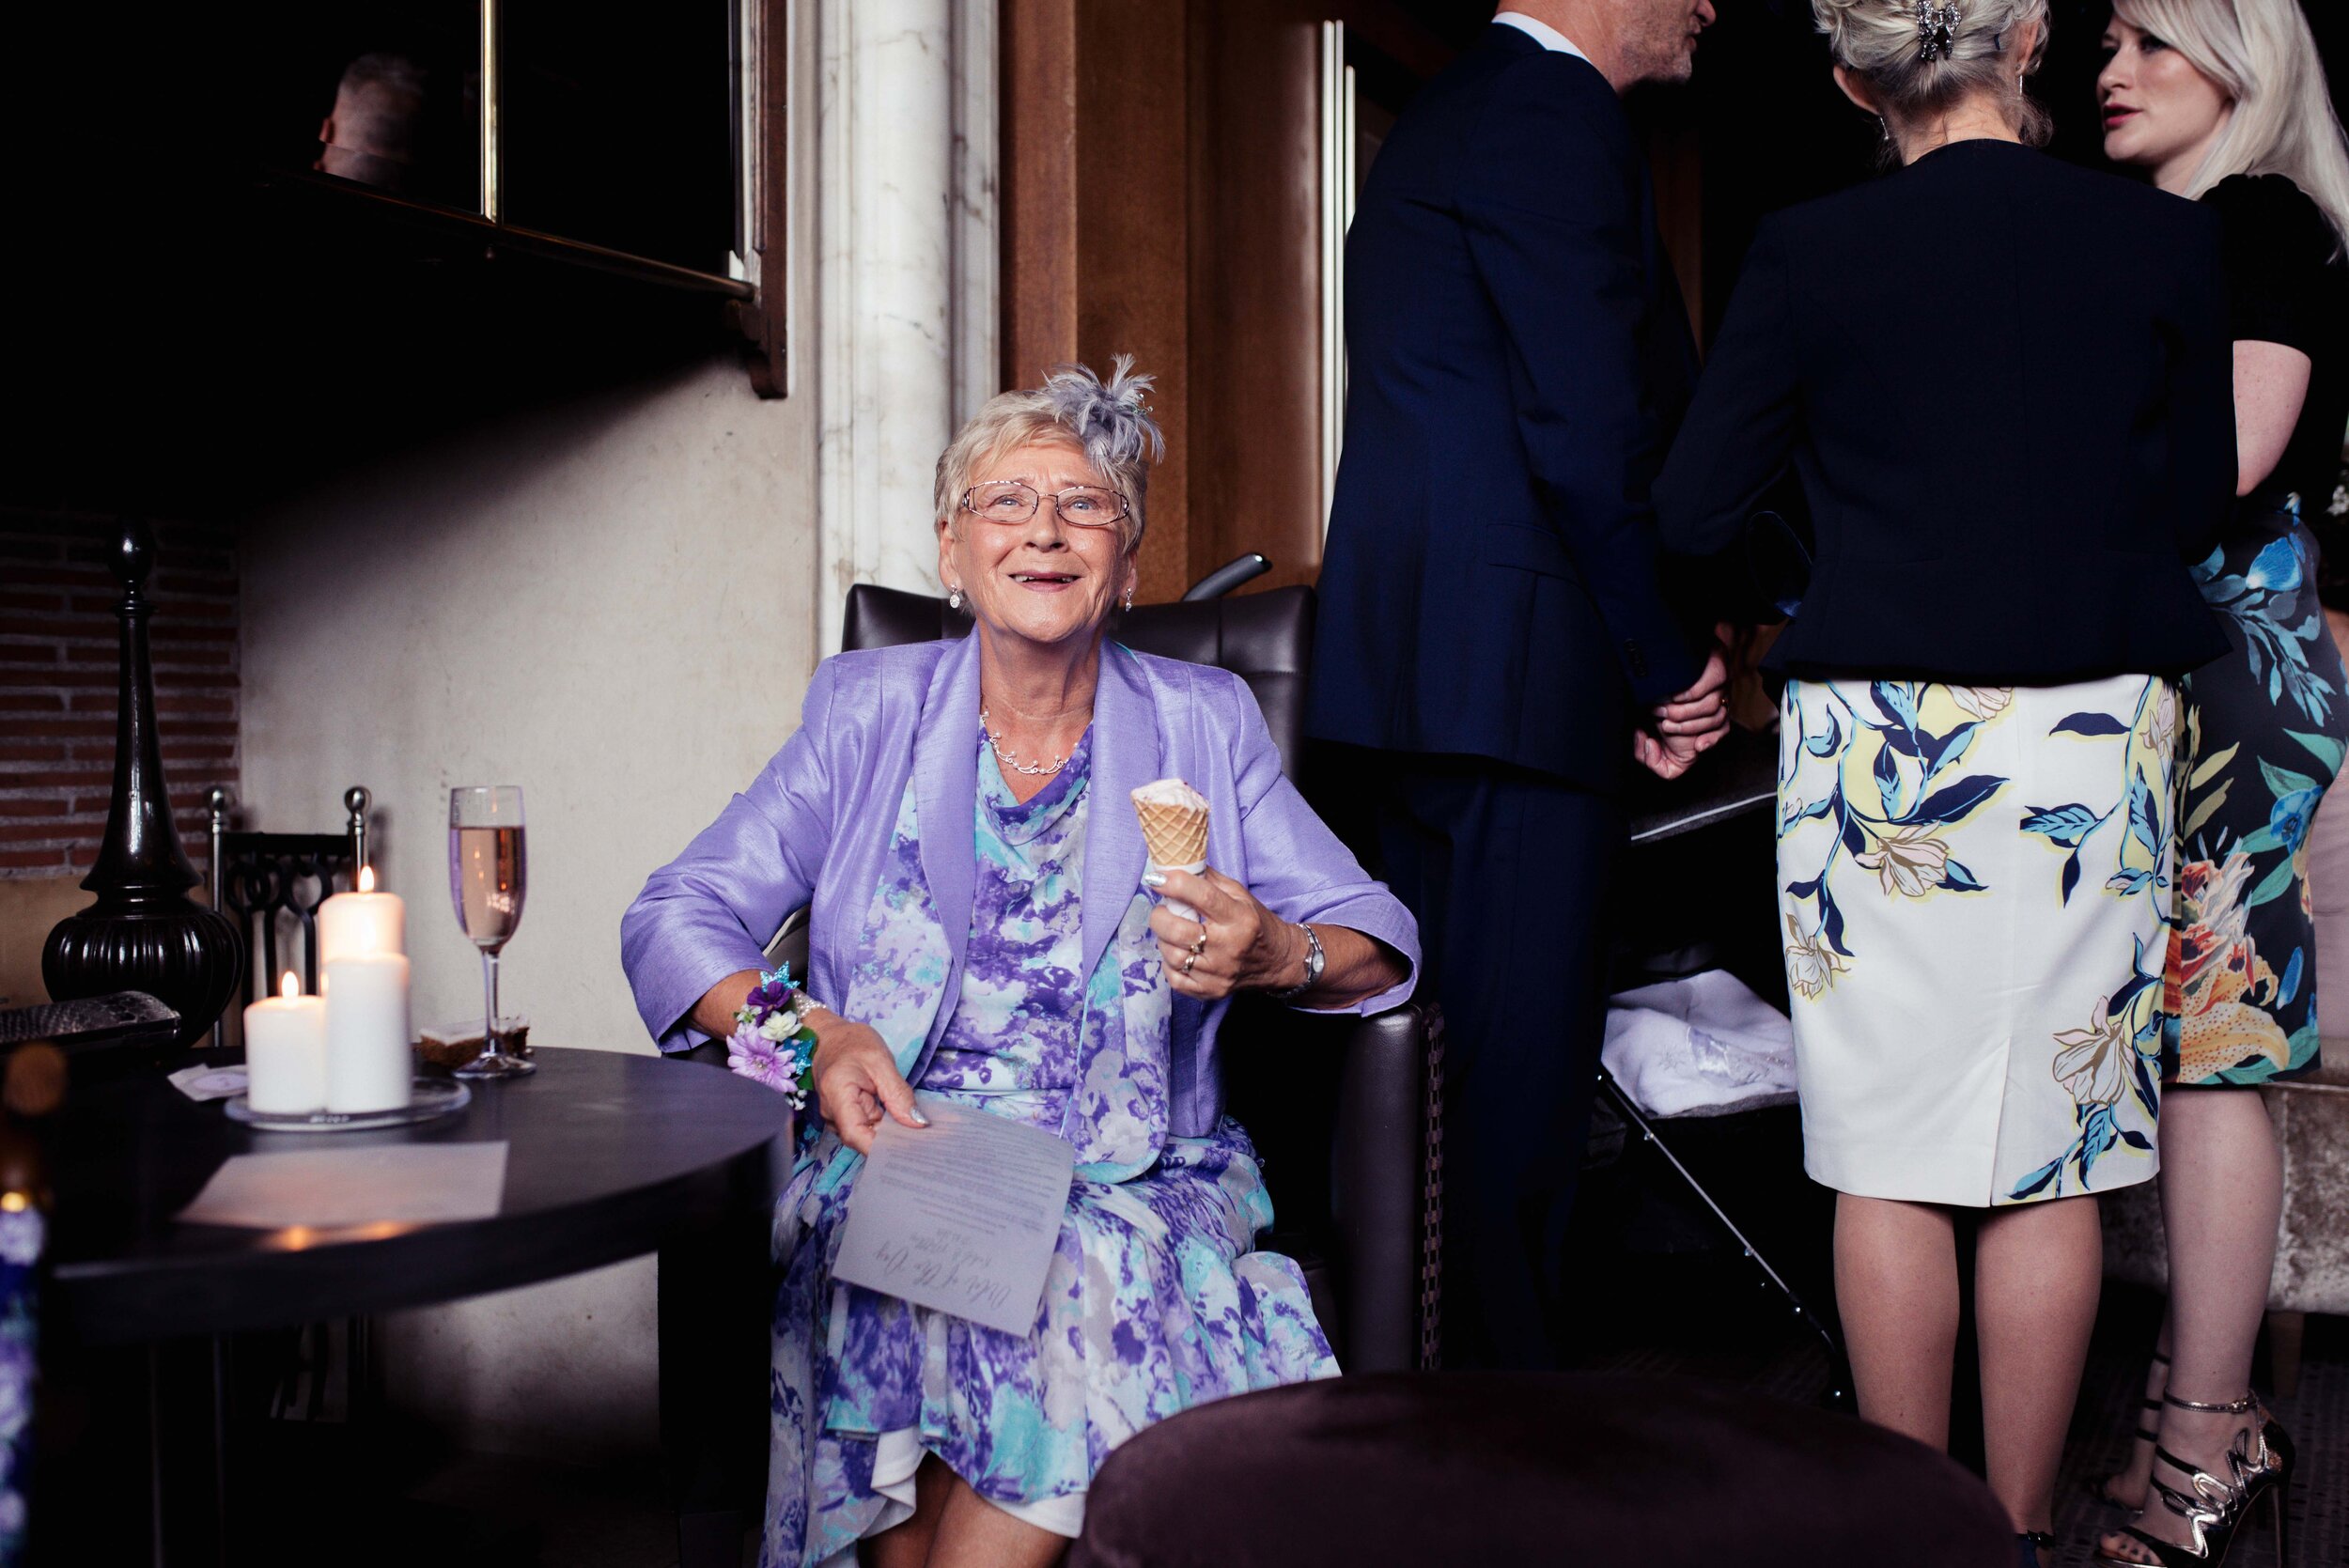 An elderly wedding guest sits in the bar eating an ice cream